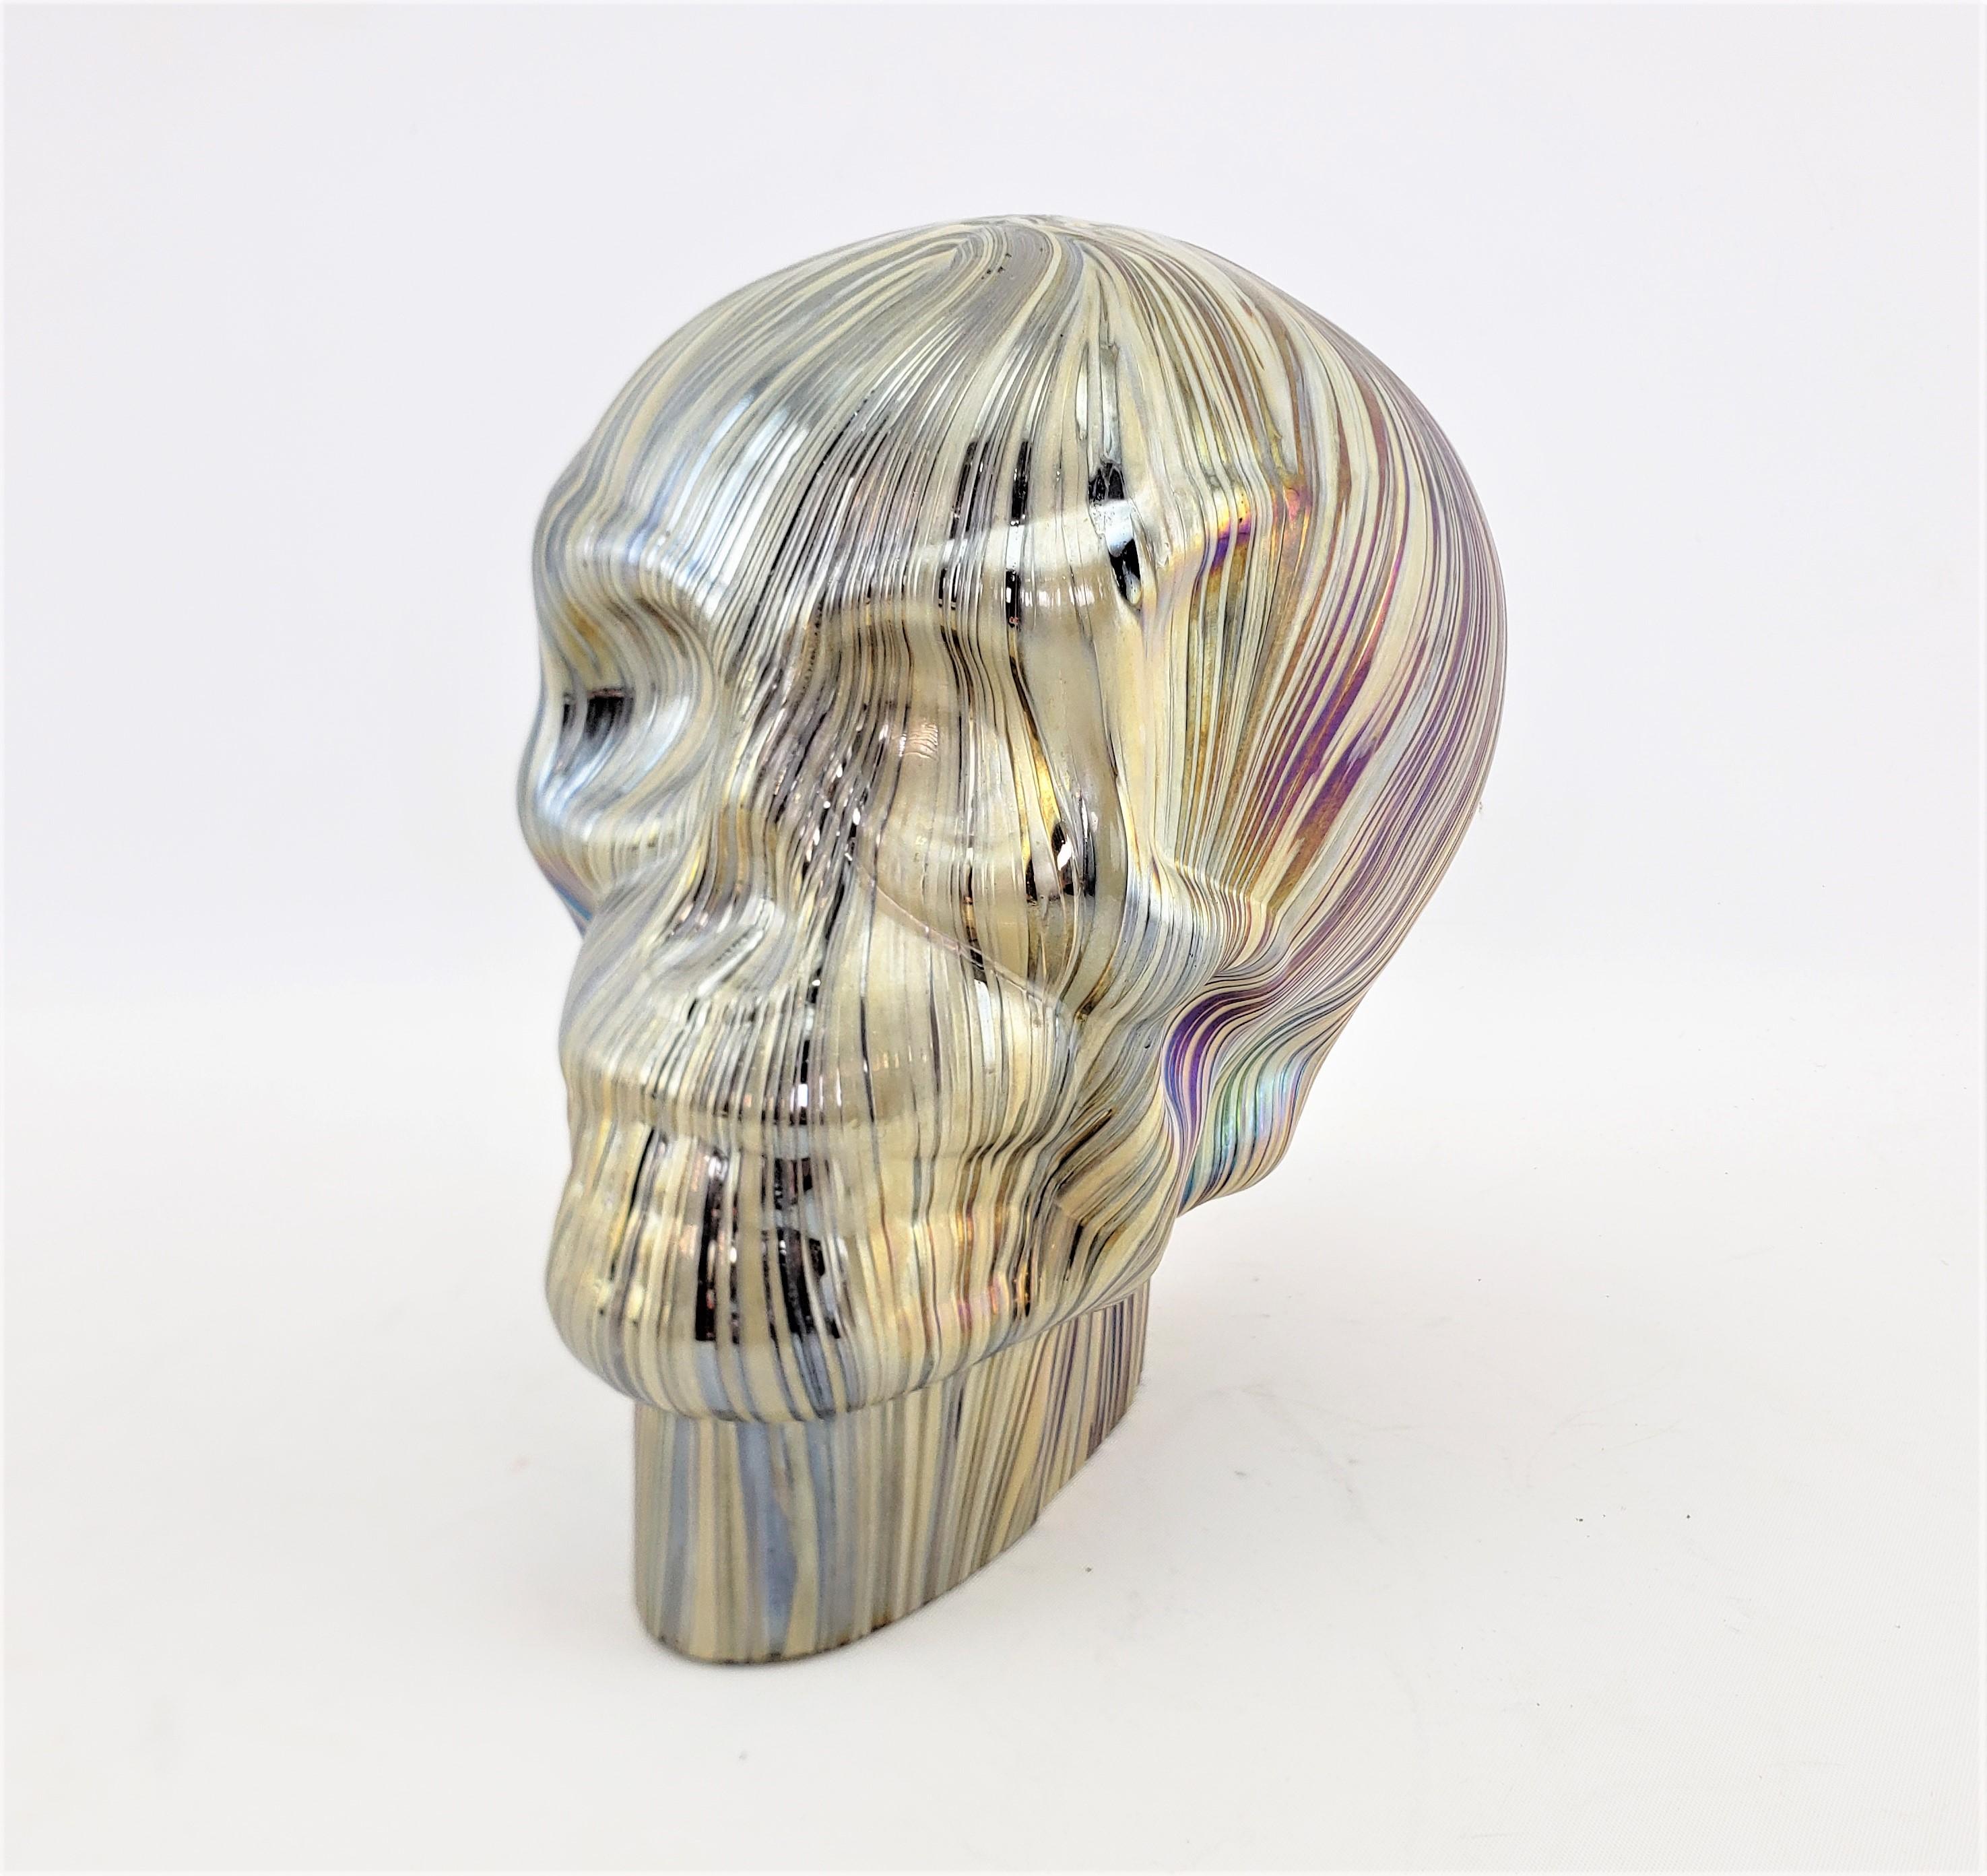 This art glass human skull is unsigned, but believed to originate from Europe, possibly Italy or the Czech Republic and date to approximately 1975 and done in a Mid-Century style. The skull is composed of a deep purple glass with a series of gold